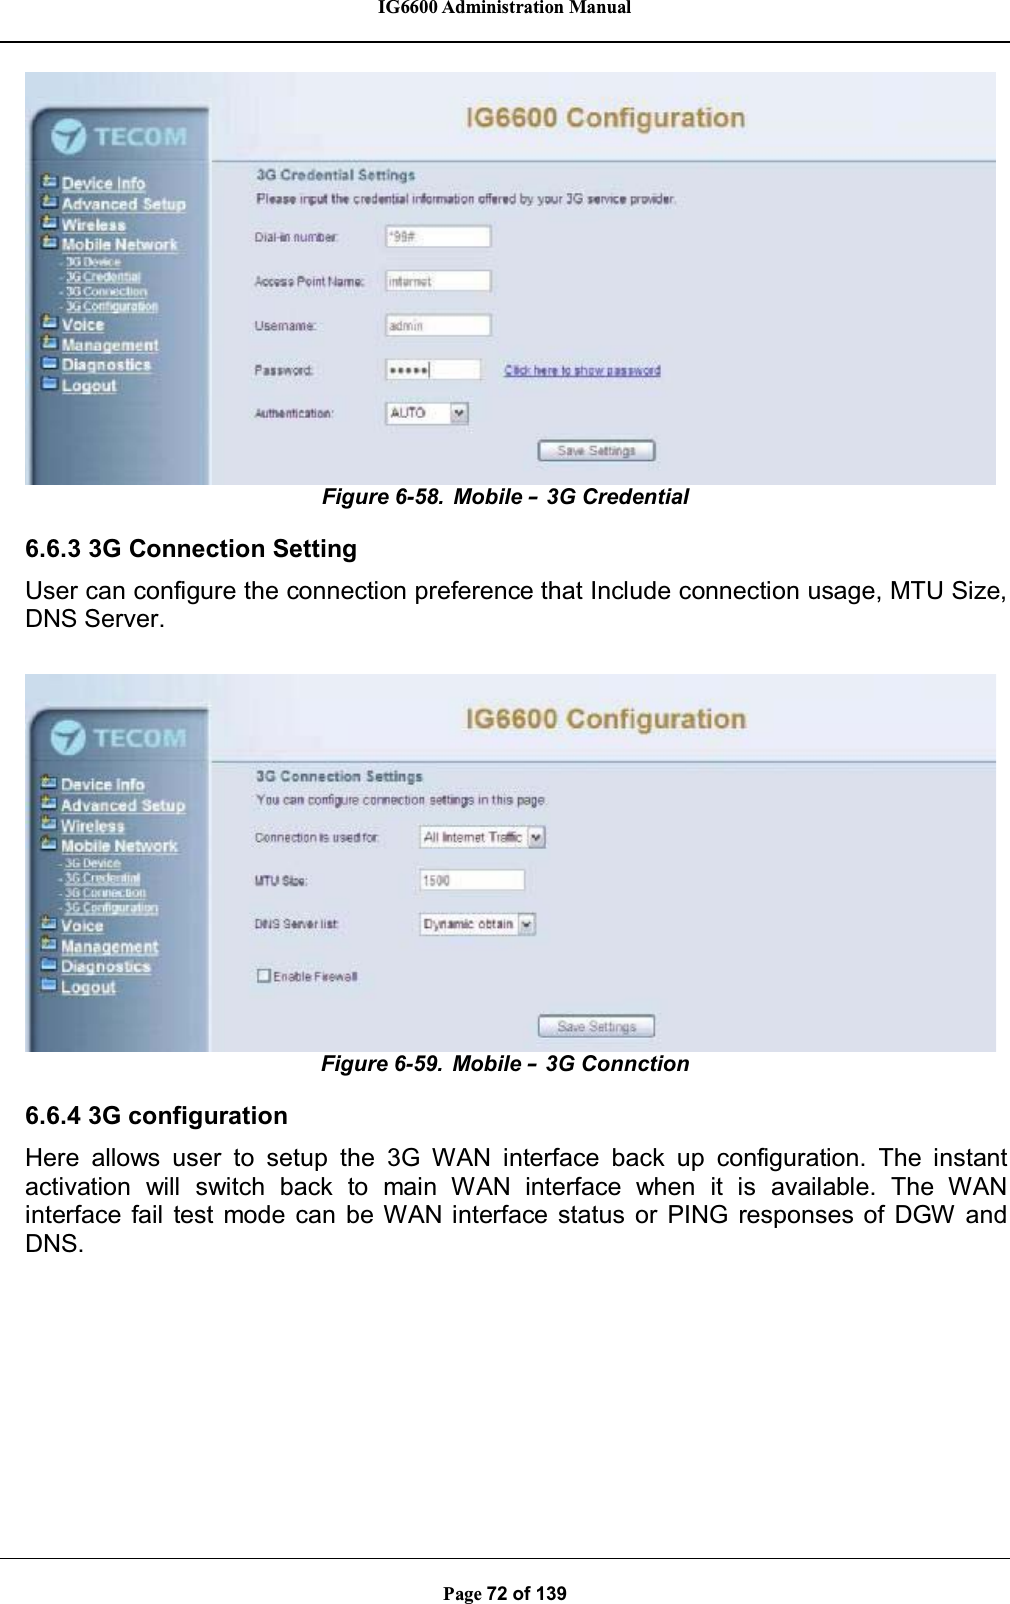 IG6600 Administration ManualPage 72 of 139Figure 6-58. Mobile –3G Credential6.6.3 3G Connection SettingUser can configure the connection preference that Include connection usage, MTU Size,DNS Server.Figure 6-59. Mobile –3G Connction6.6.4 3G configurationHere allows user to setup the 3G WAN interface back up configuration. The instantactivation will switch back to main WAN interface when it is available. The WANinterface fail test mode can be WAN interface status or PING responses of DGW andDNS.